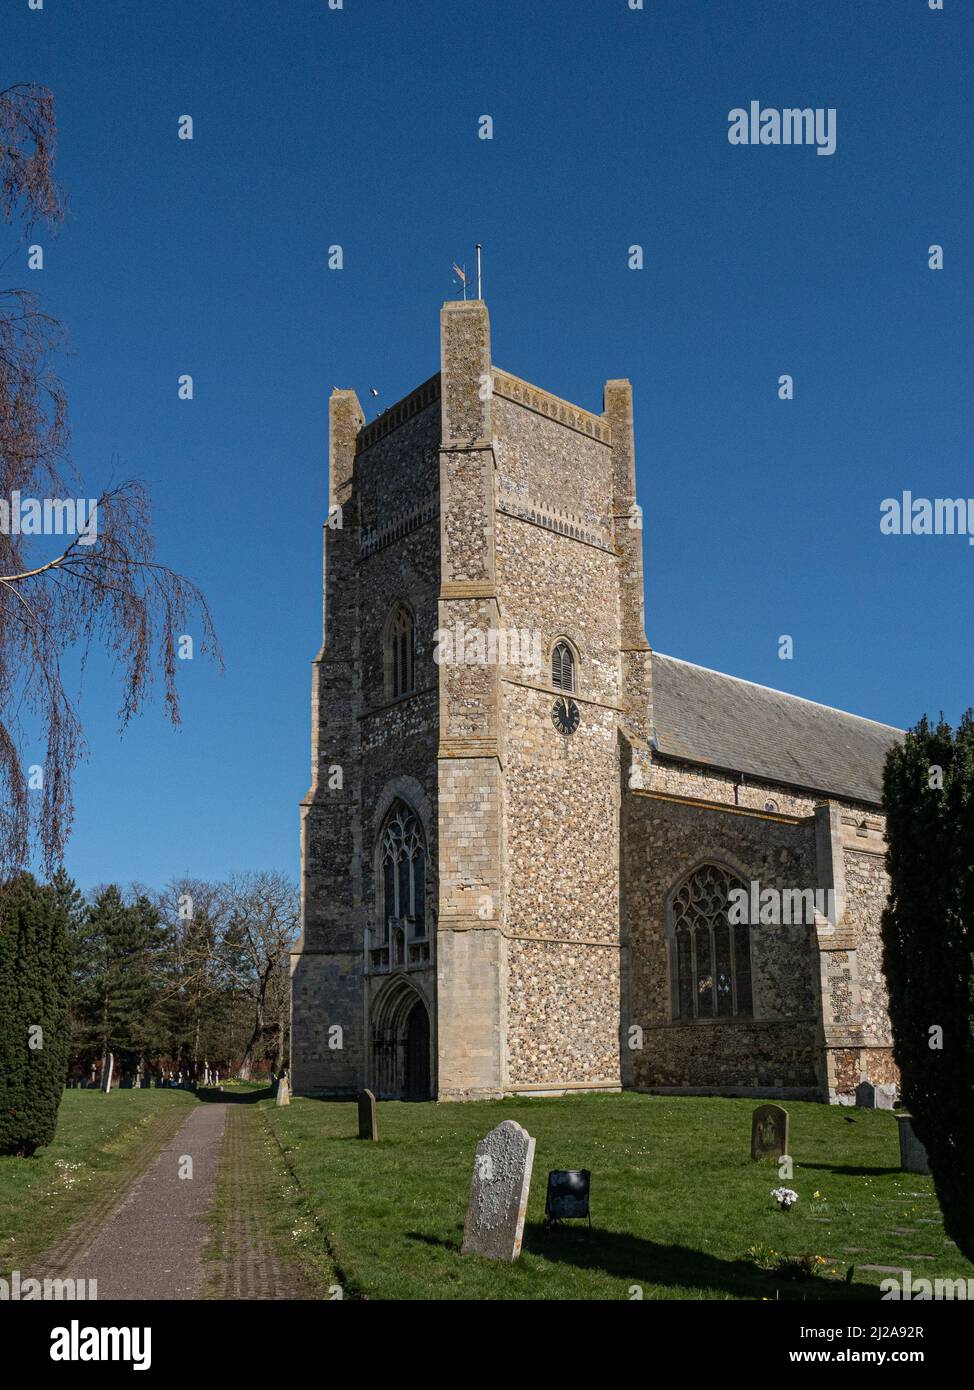 The tower of St Bartholomew's Church, Orford set against a clear blue sky Stock Photo